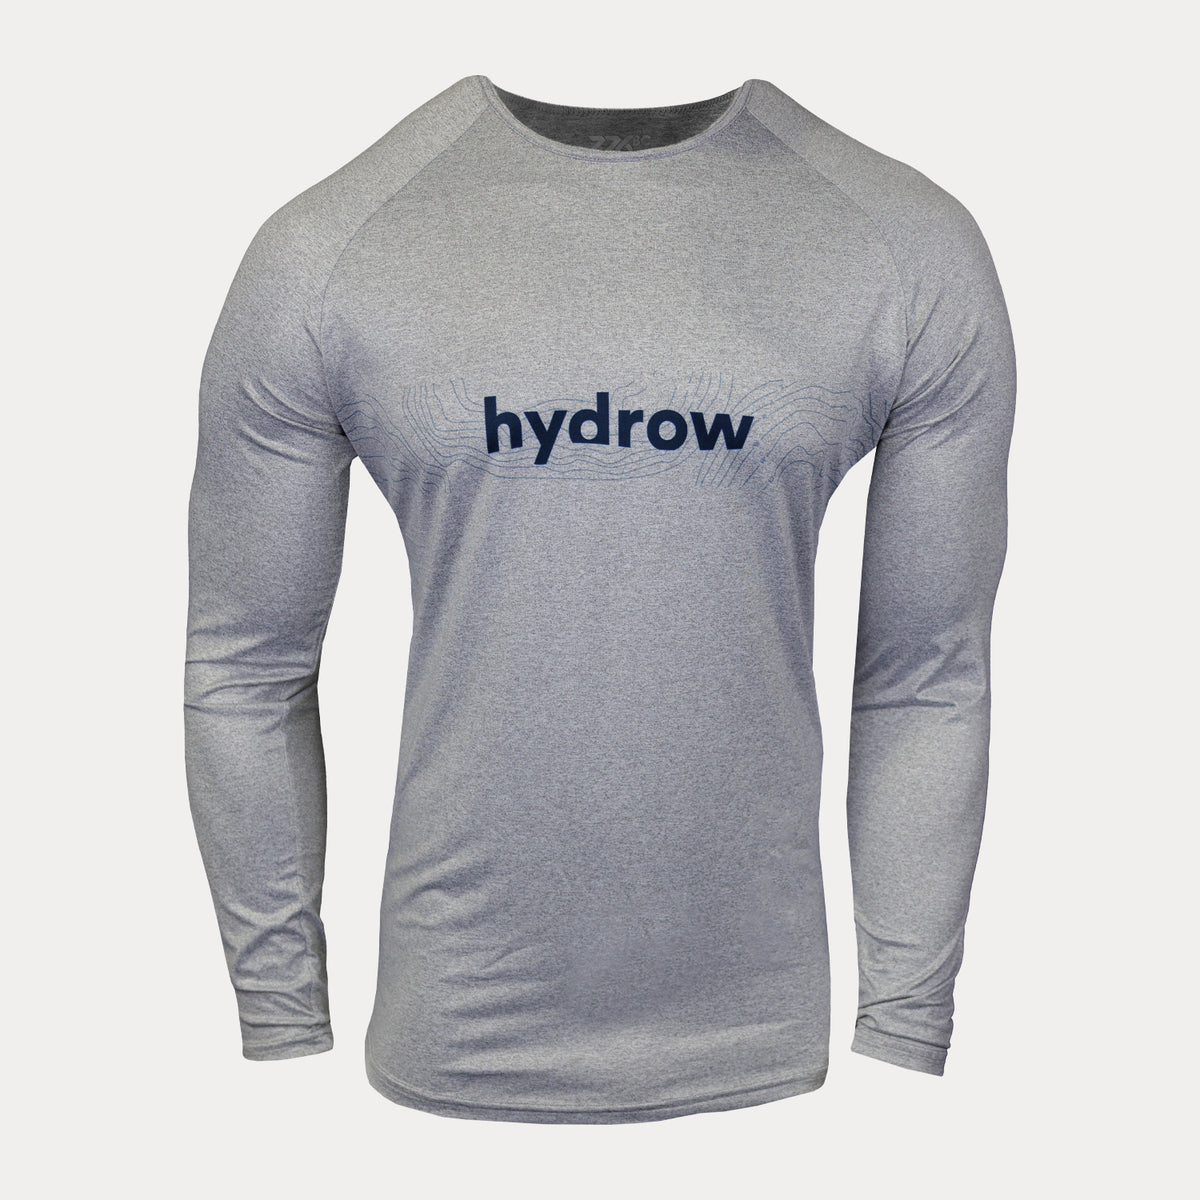 Grey ls shirt with dark blue hydrow text on chest